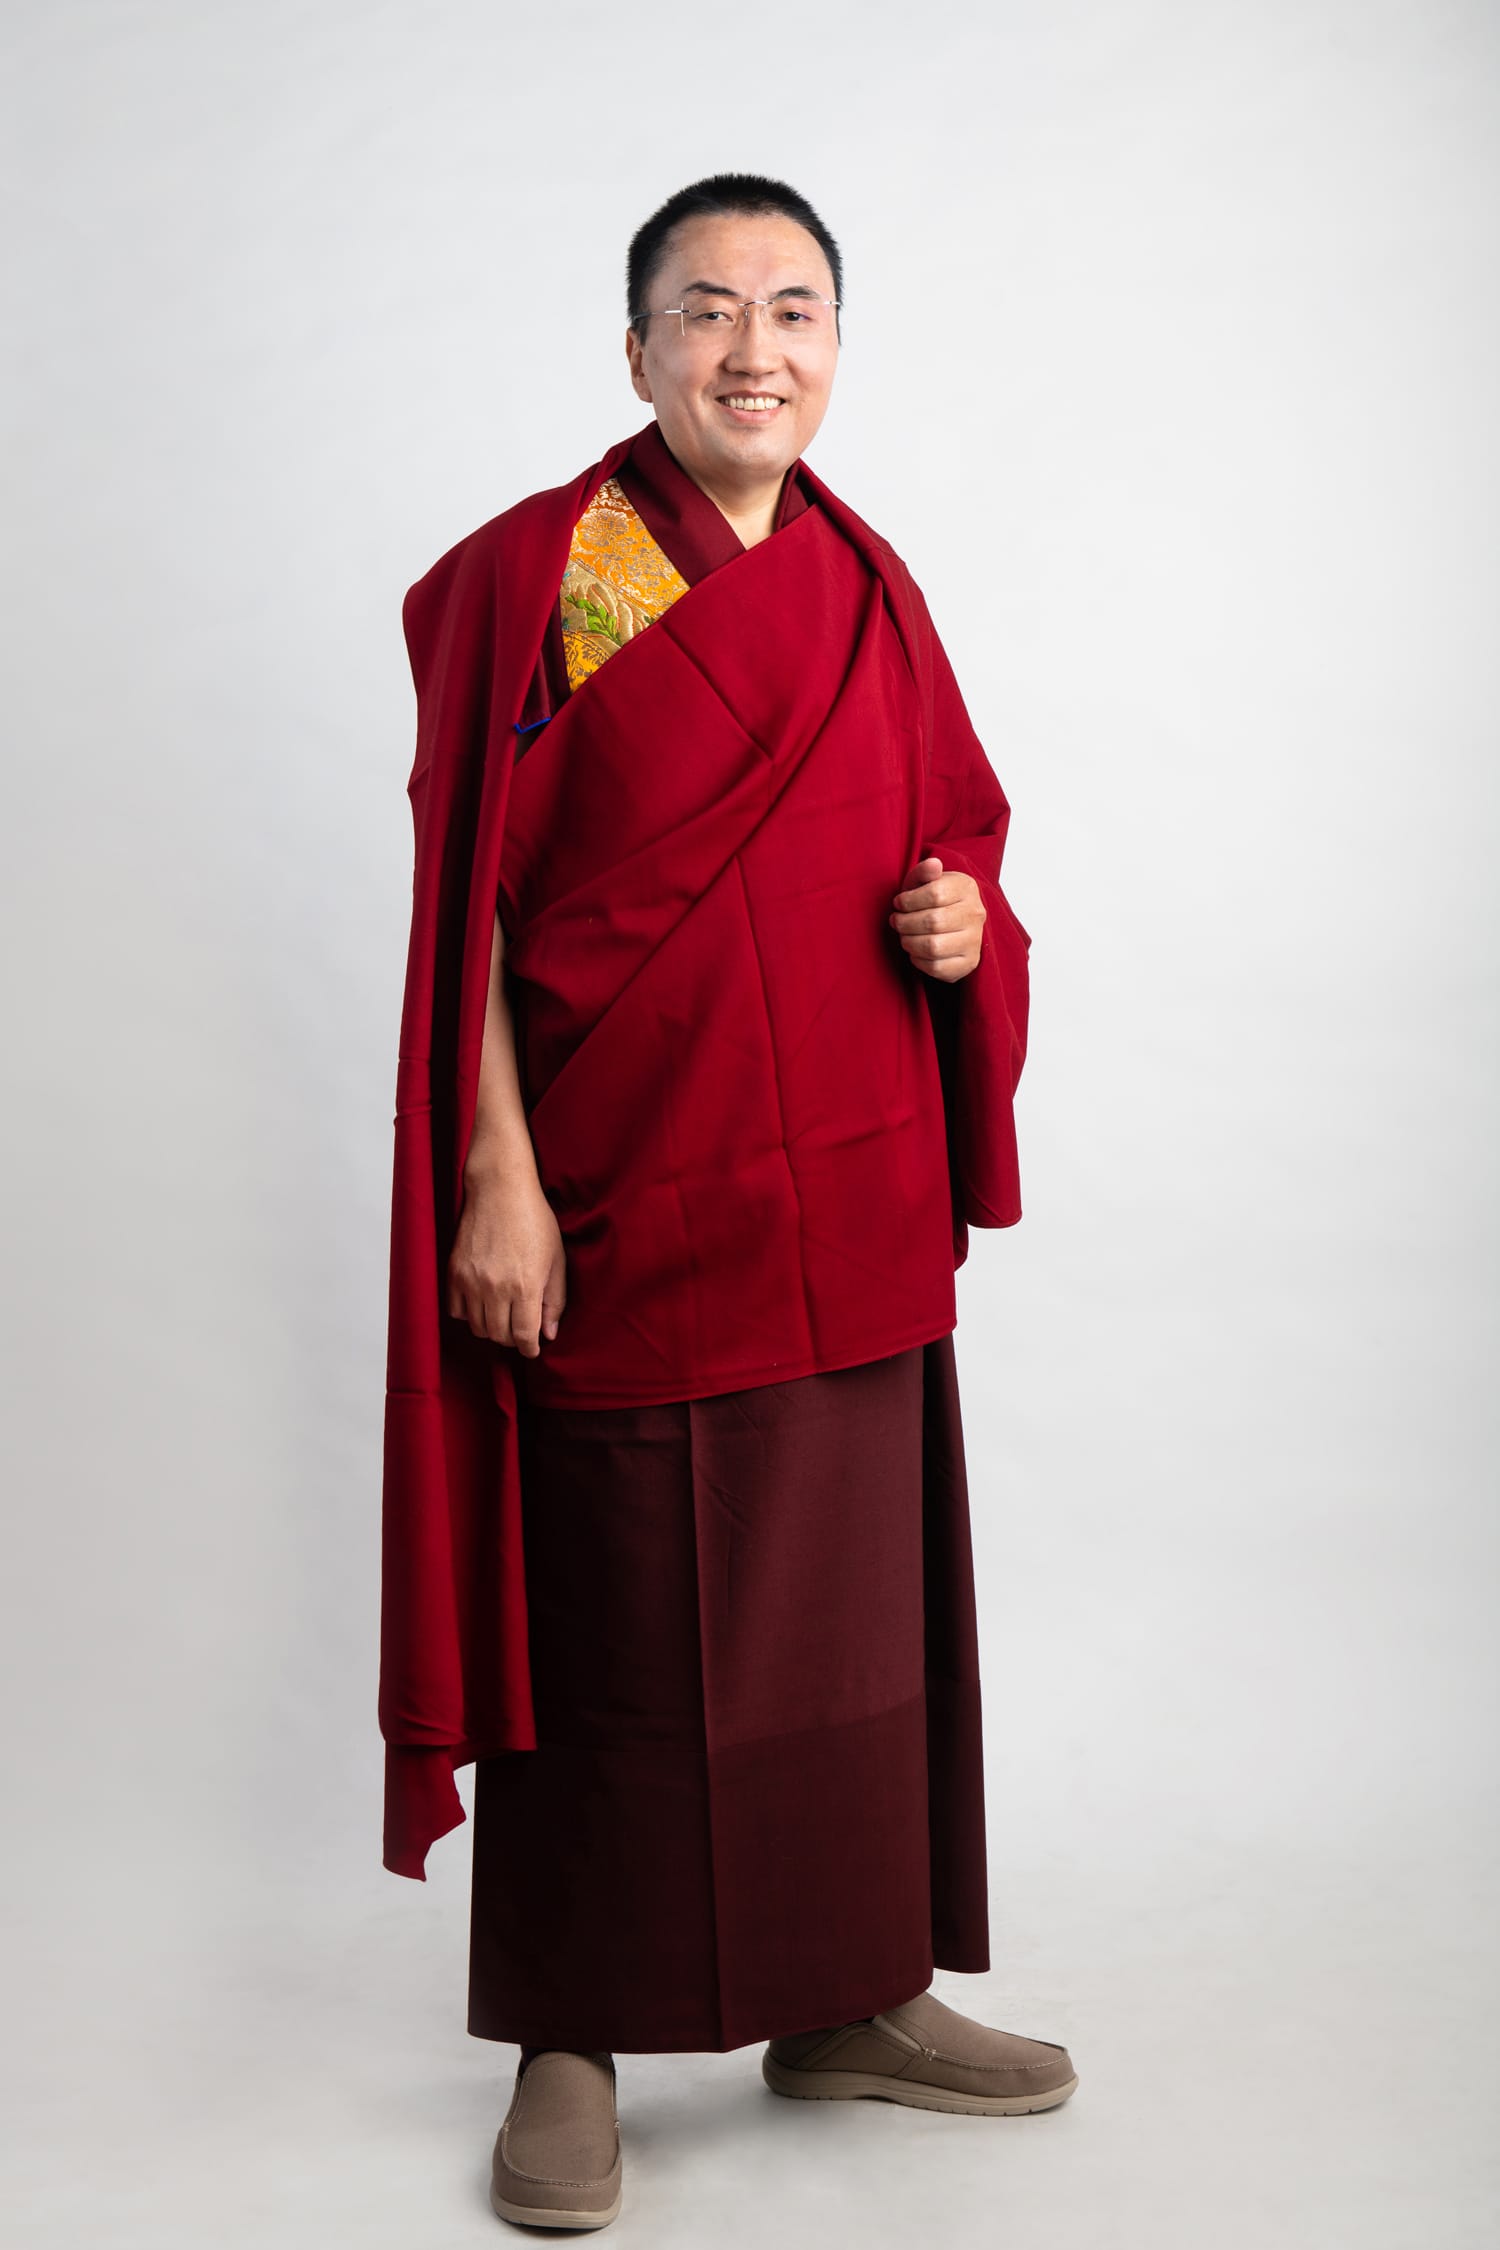 A monk (rinpoche) wearing red traditional robes poses for his headshot during a professional indoor photo shoot in Singapore